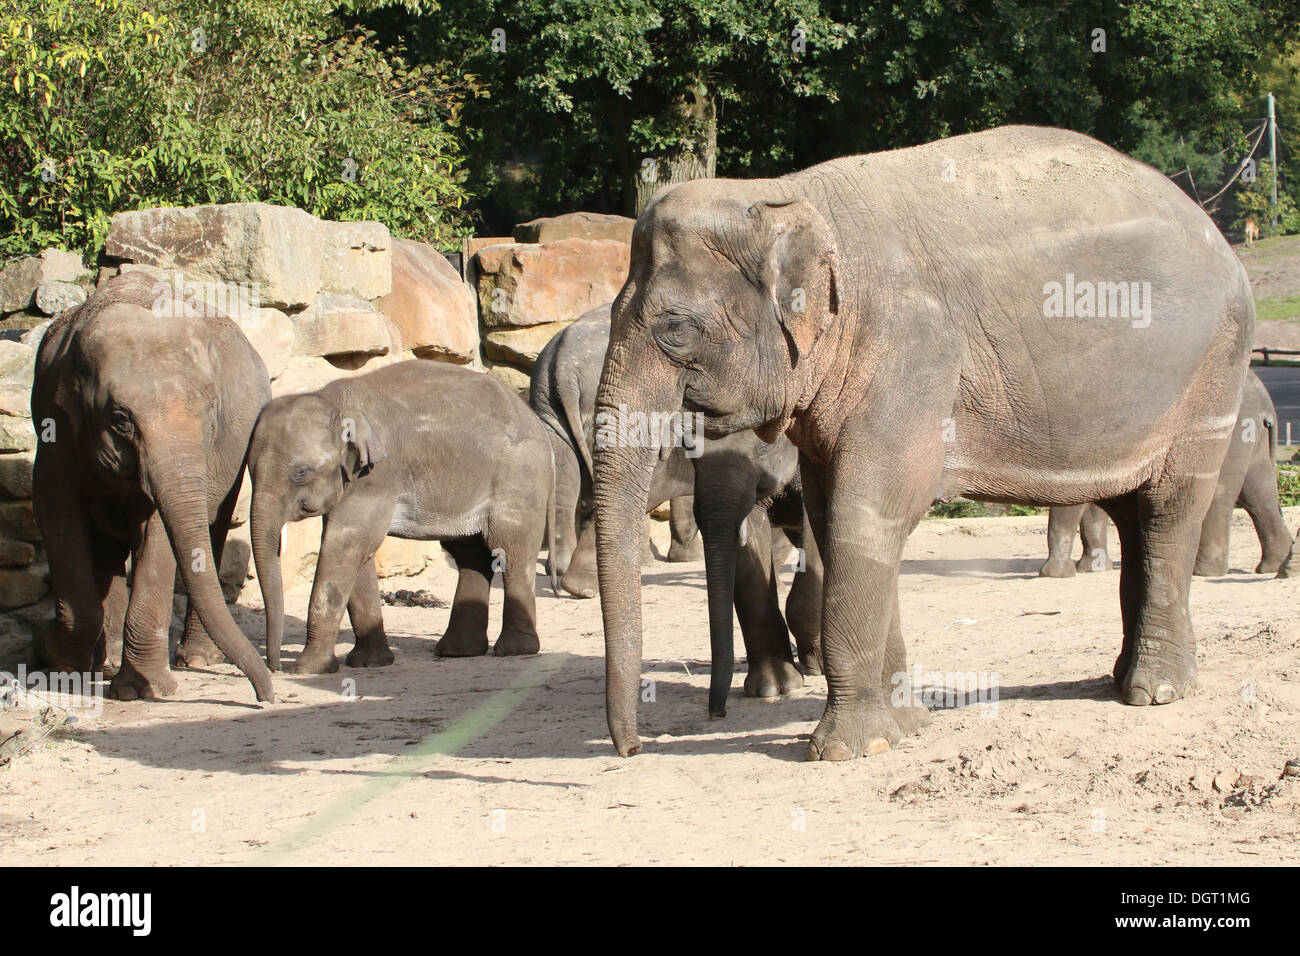 Group of Asian elephants (Elephas maximus) in a zoo setting Stock Photo